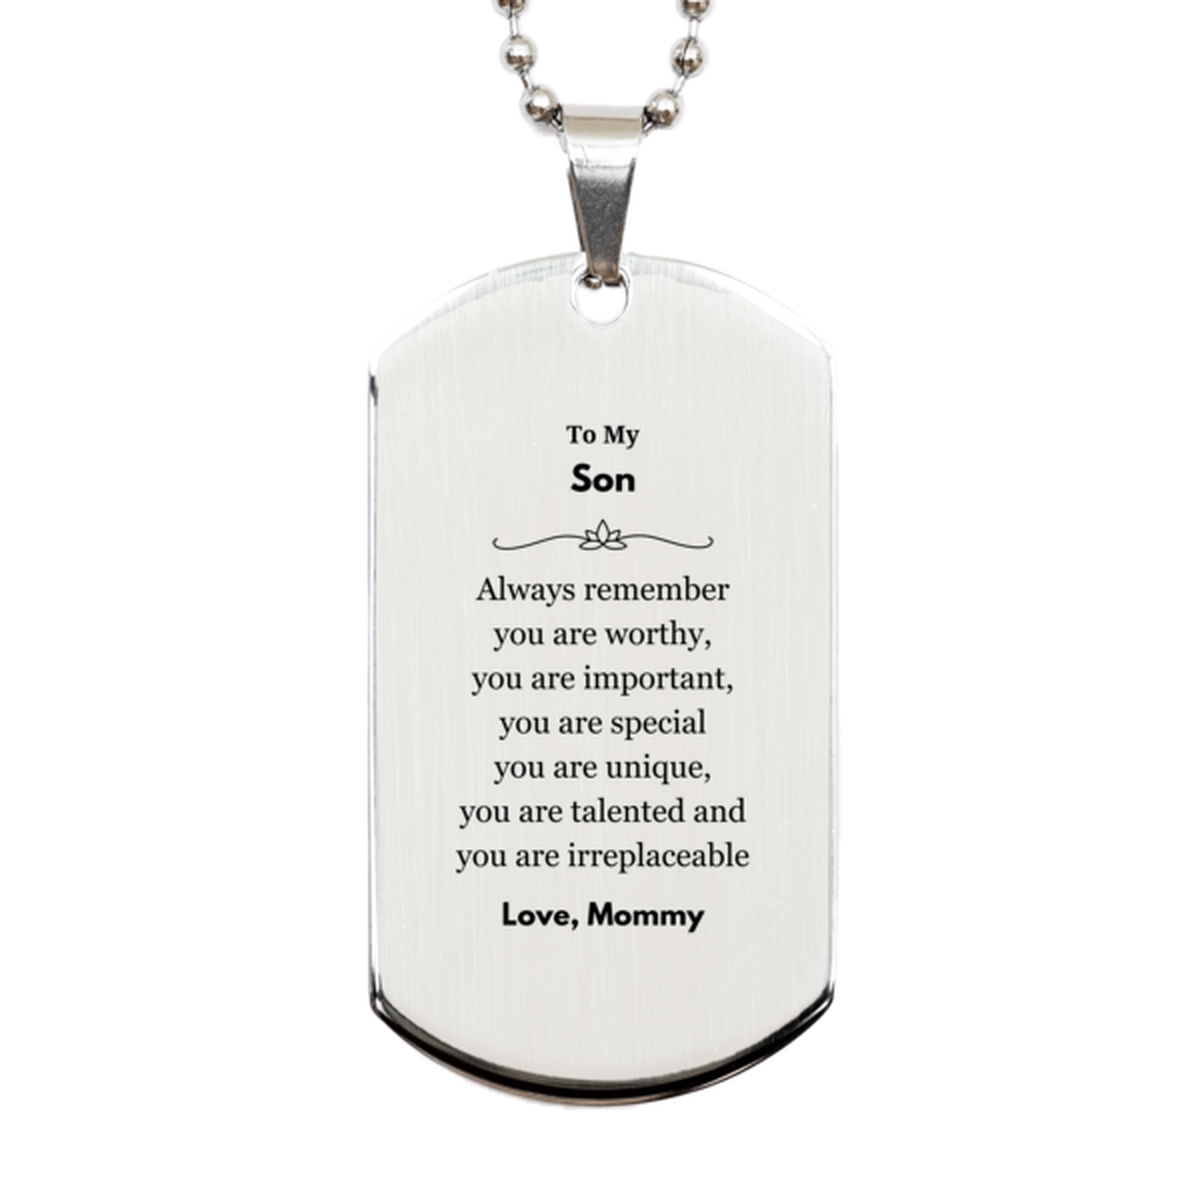 Son Birthday Gifts from Mommy, Inspirational Silver Dog Tag for Son Christmas Graduation Gifts for Son Always remember you are worthy, you are important. Love, Mommy